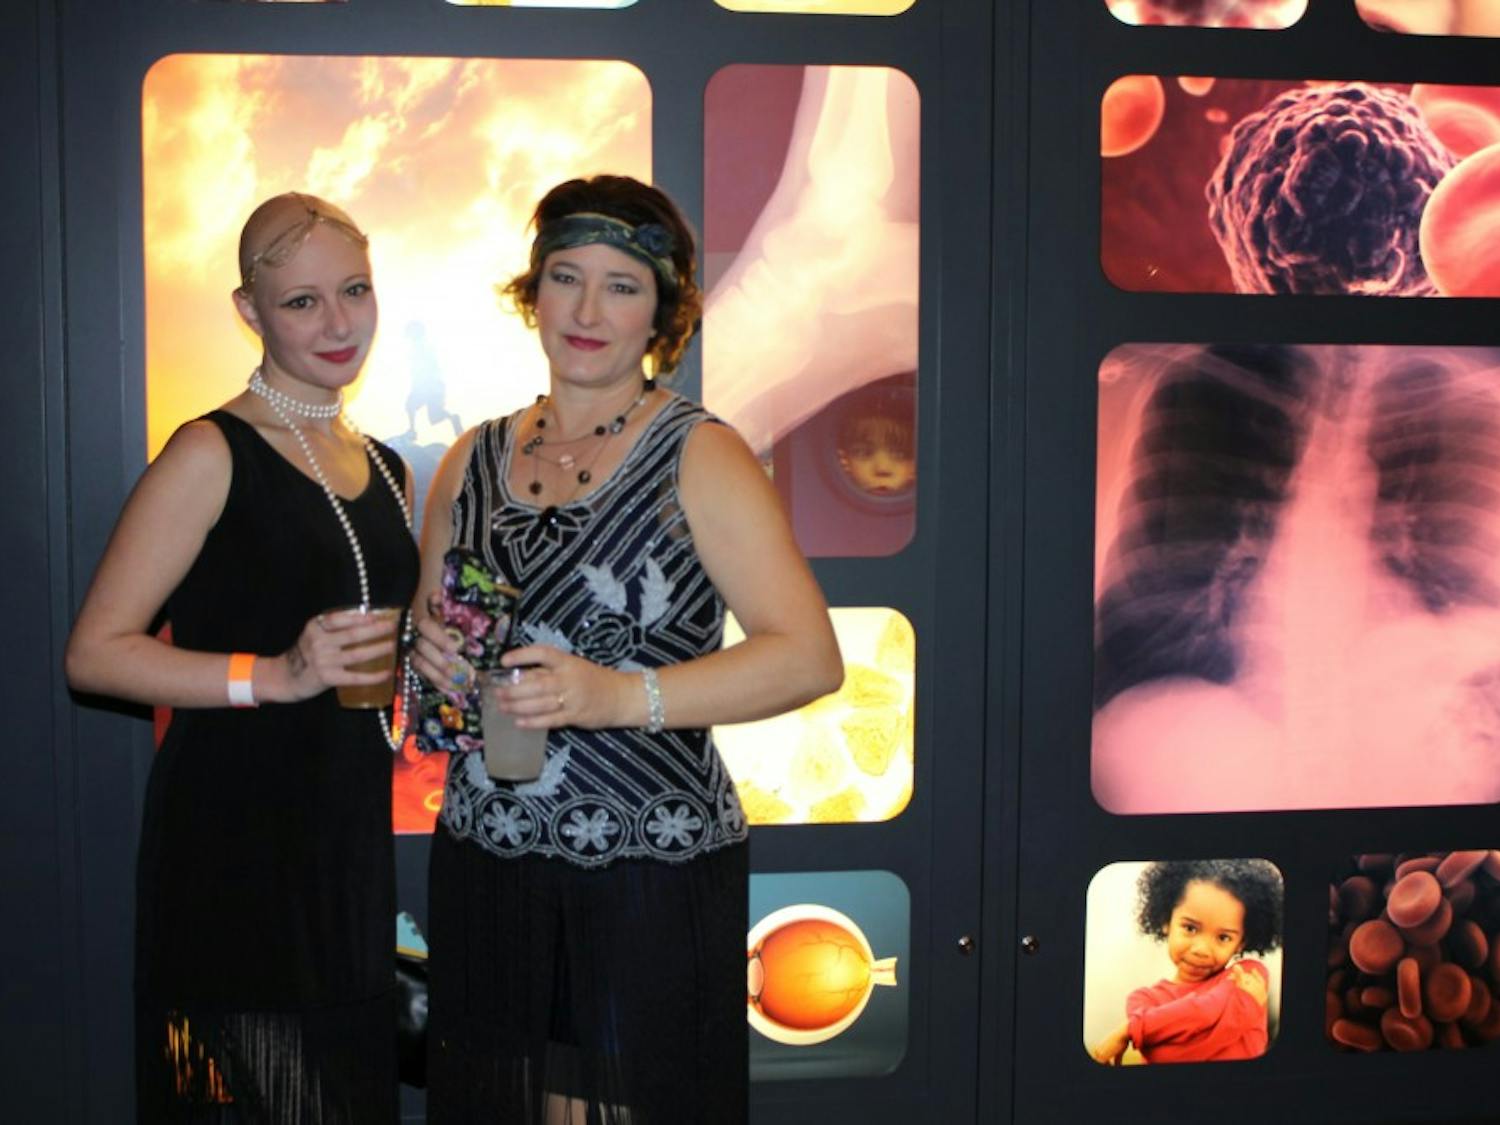 Rachel Sugihara, left, and Jenny Davie take part in Friday's 1920s-themed festivities at the Arizona Science Center.&nbsp;The monthly events are designed to engage local adults.